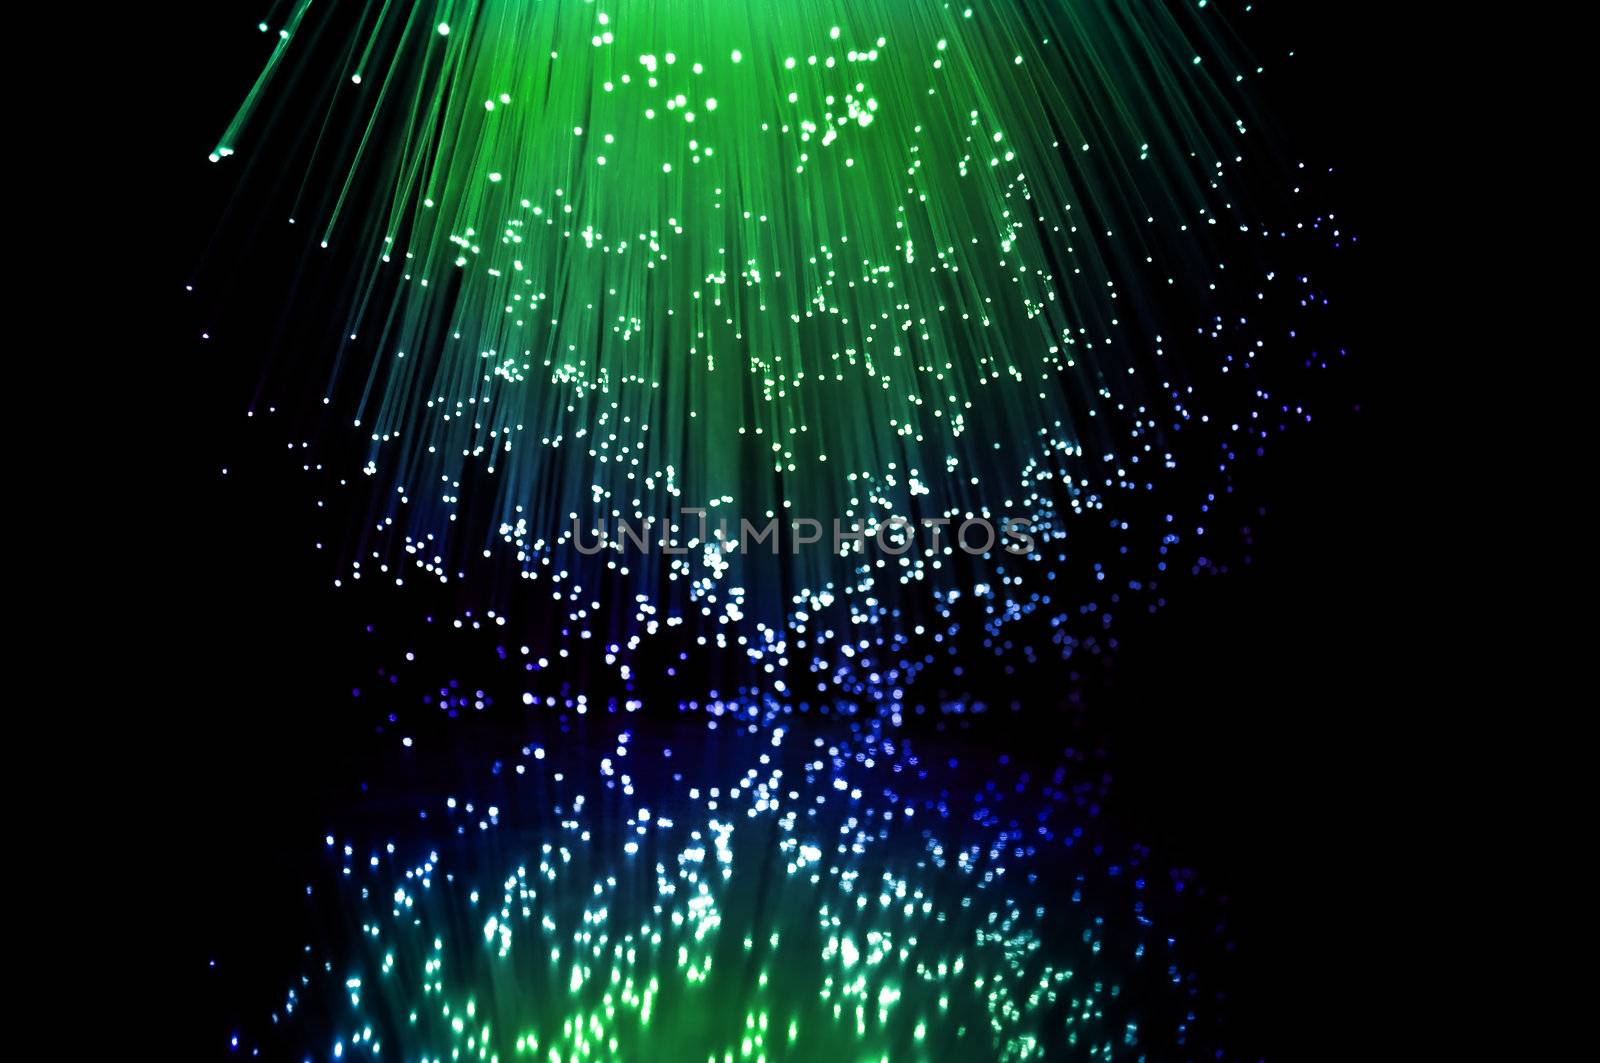 Green and blue fibre optic light strands reflecting in the foreground.